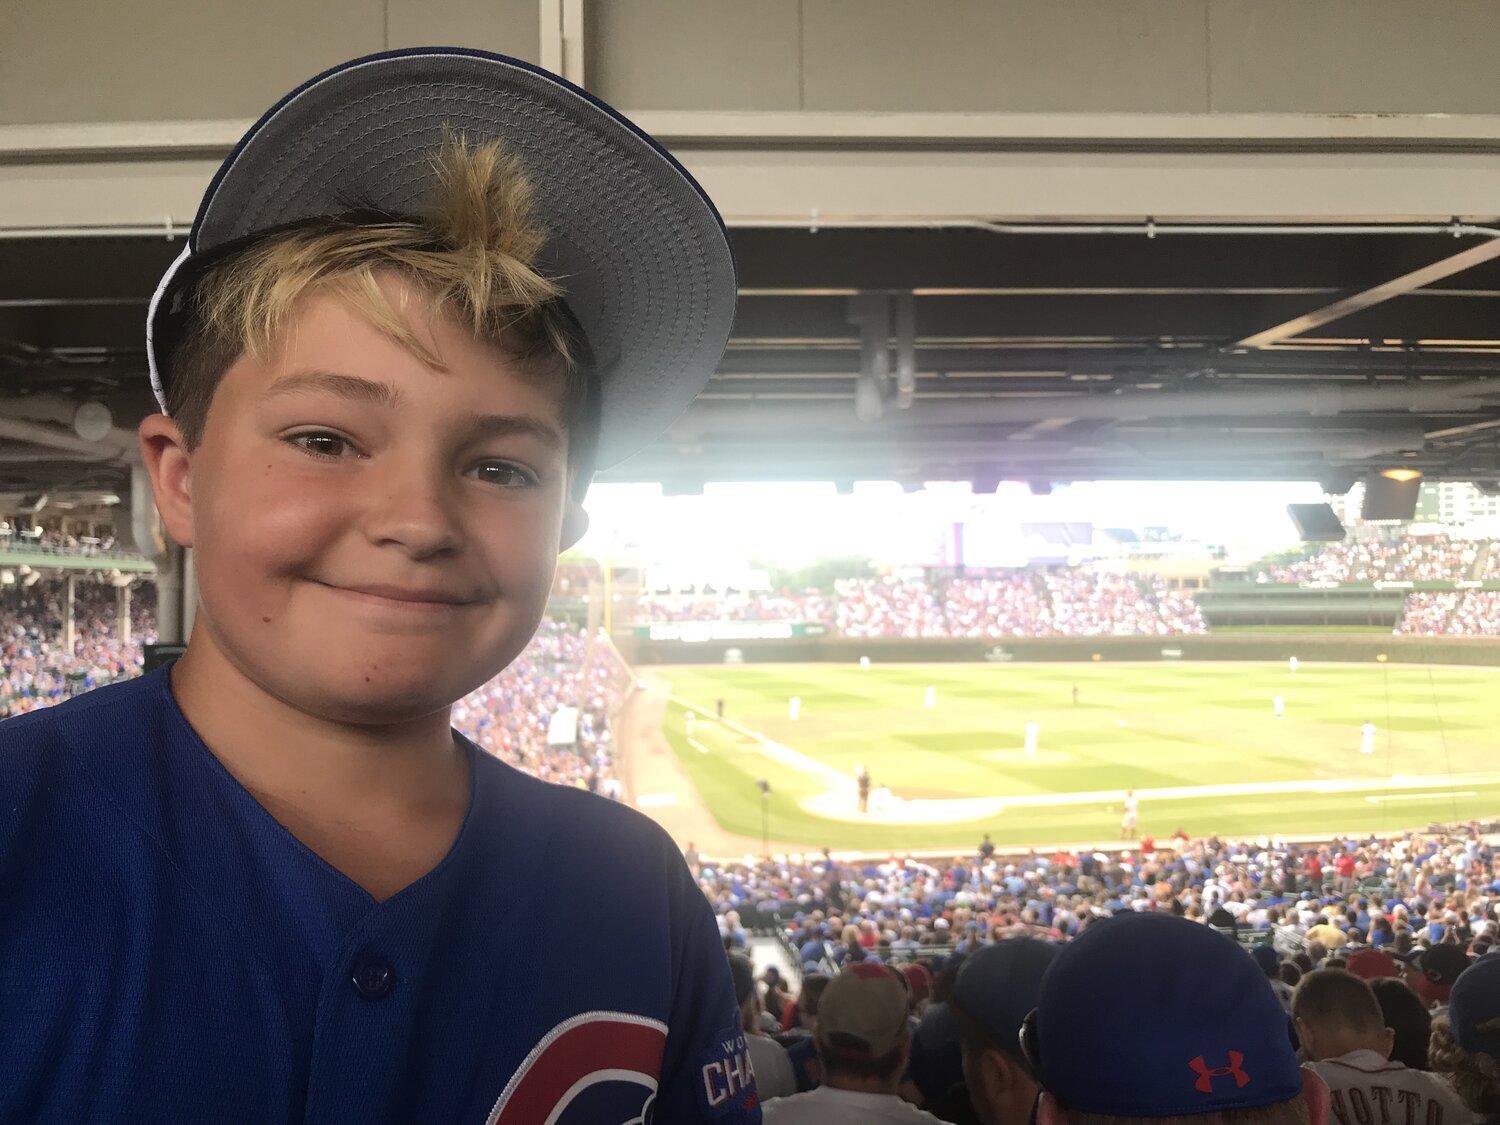 Ollie at Wrigley Field - Chicago, home of the Cubs